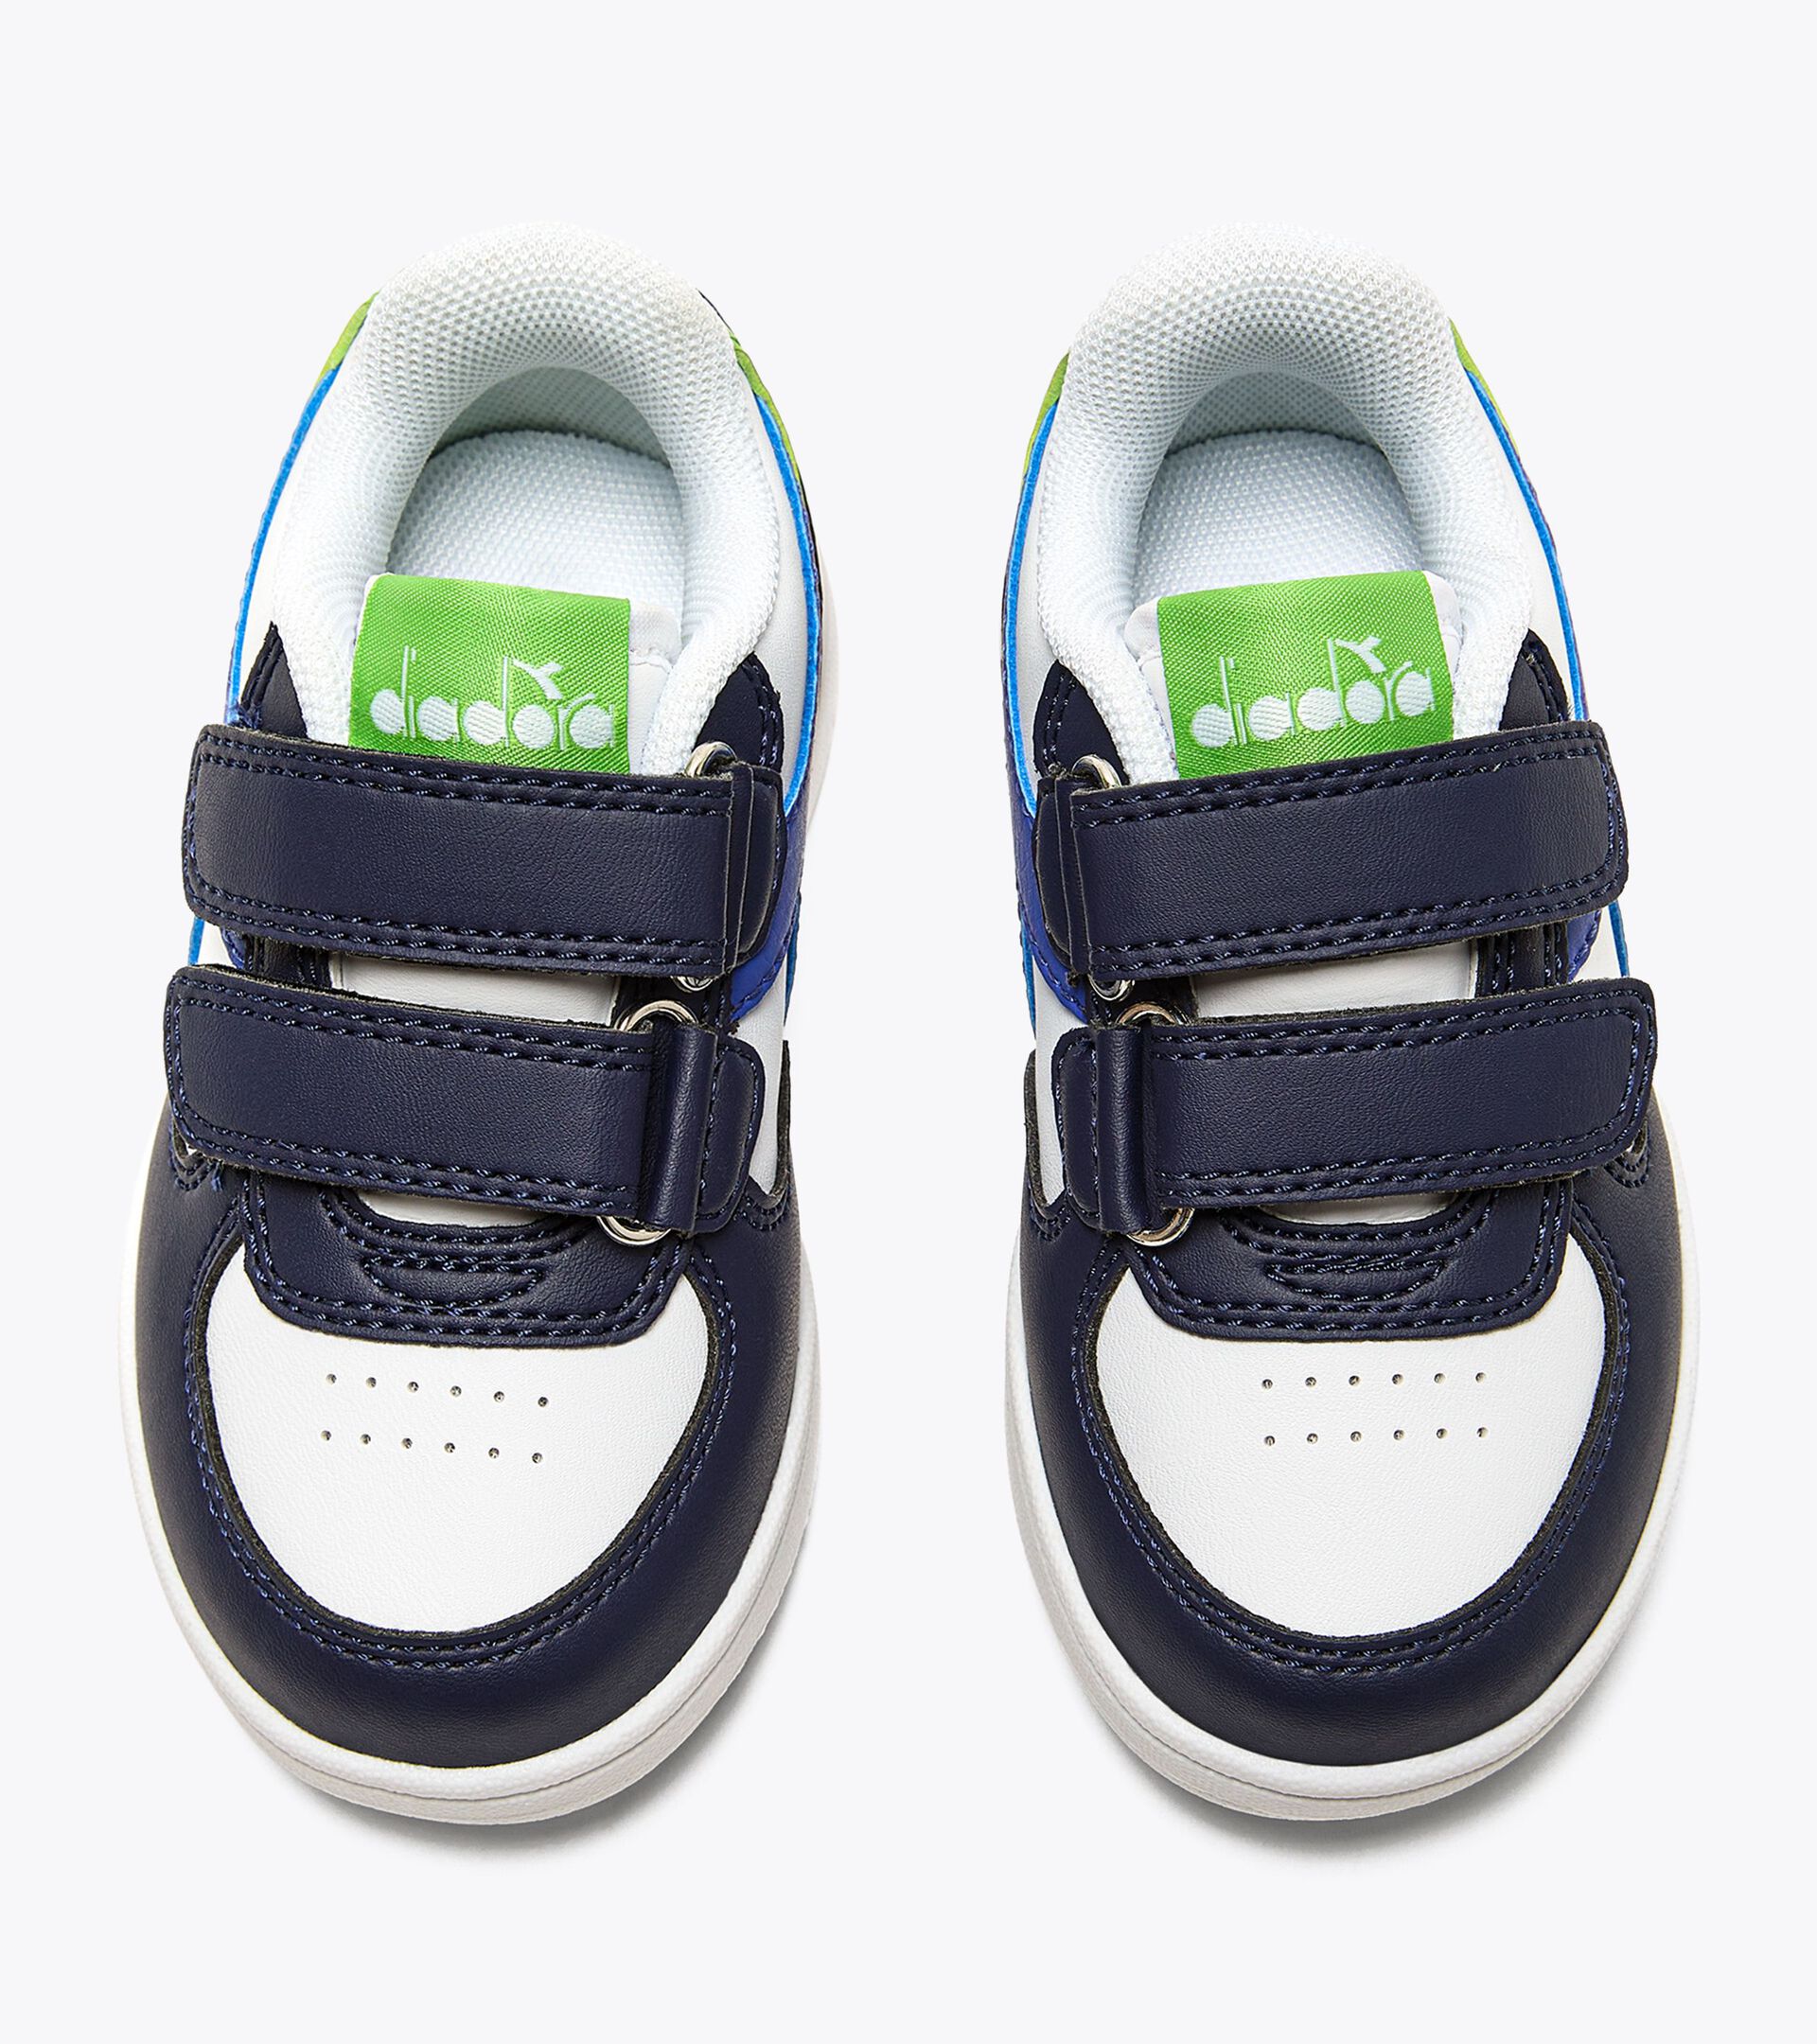 Sports shoes - Toddlers 1-4 years RAPTOR LOW TD PEACOAT/SURF THE WEB/JASMINE G - Diadora